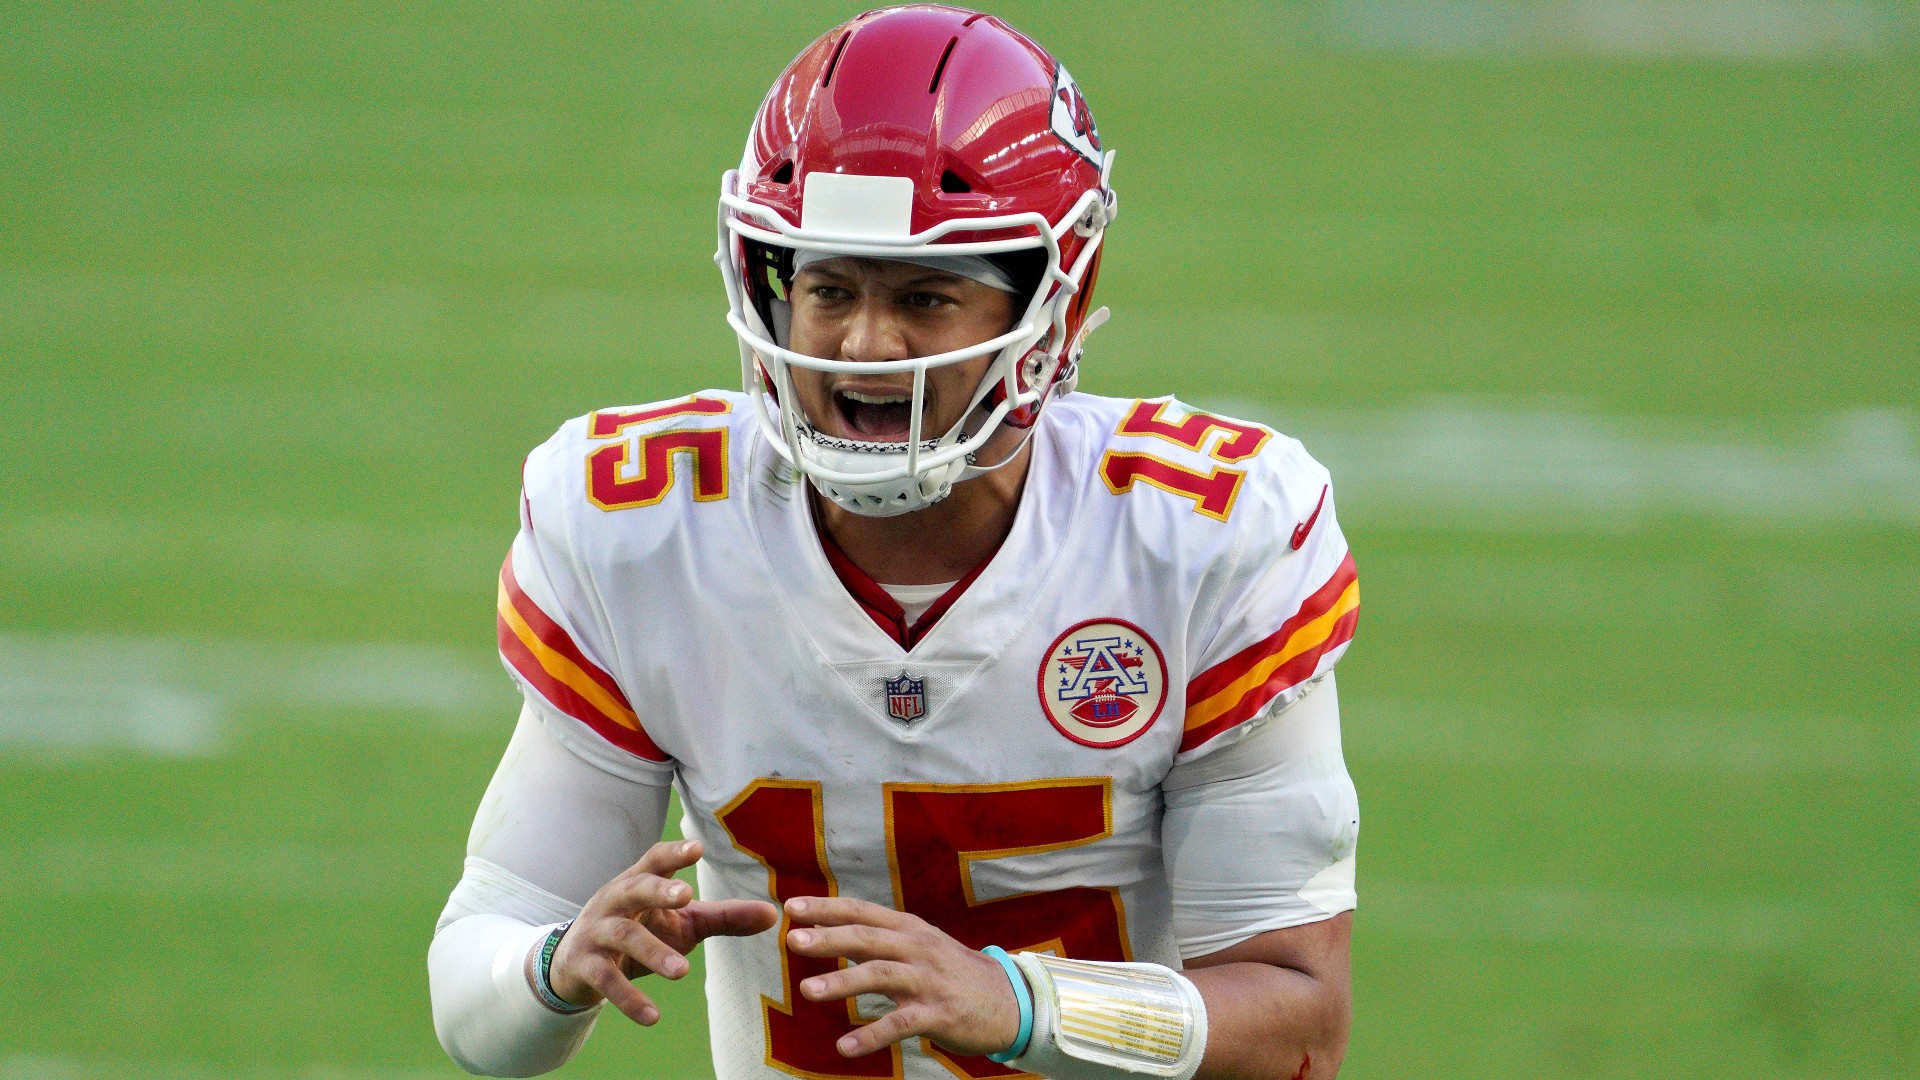 Patrick Mahomes' underhand pass, other trick plays keep Chiefs' opponents guessing